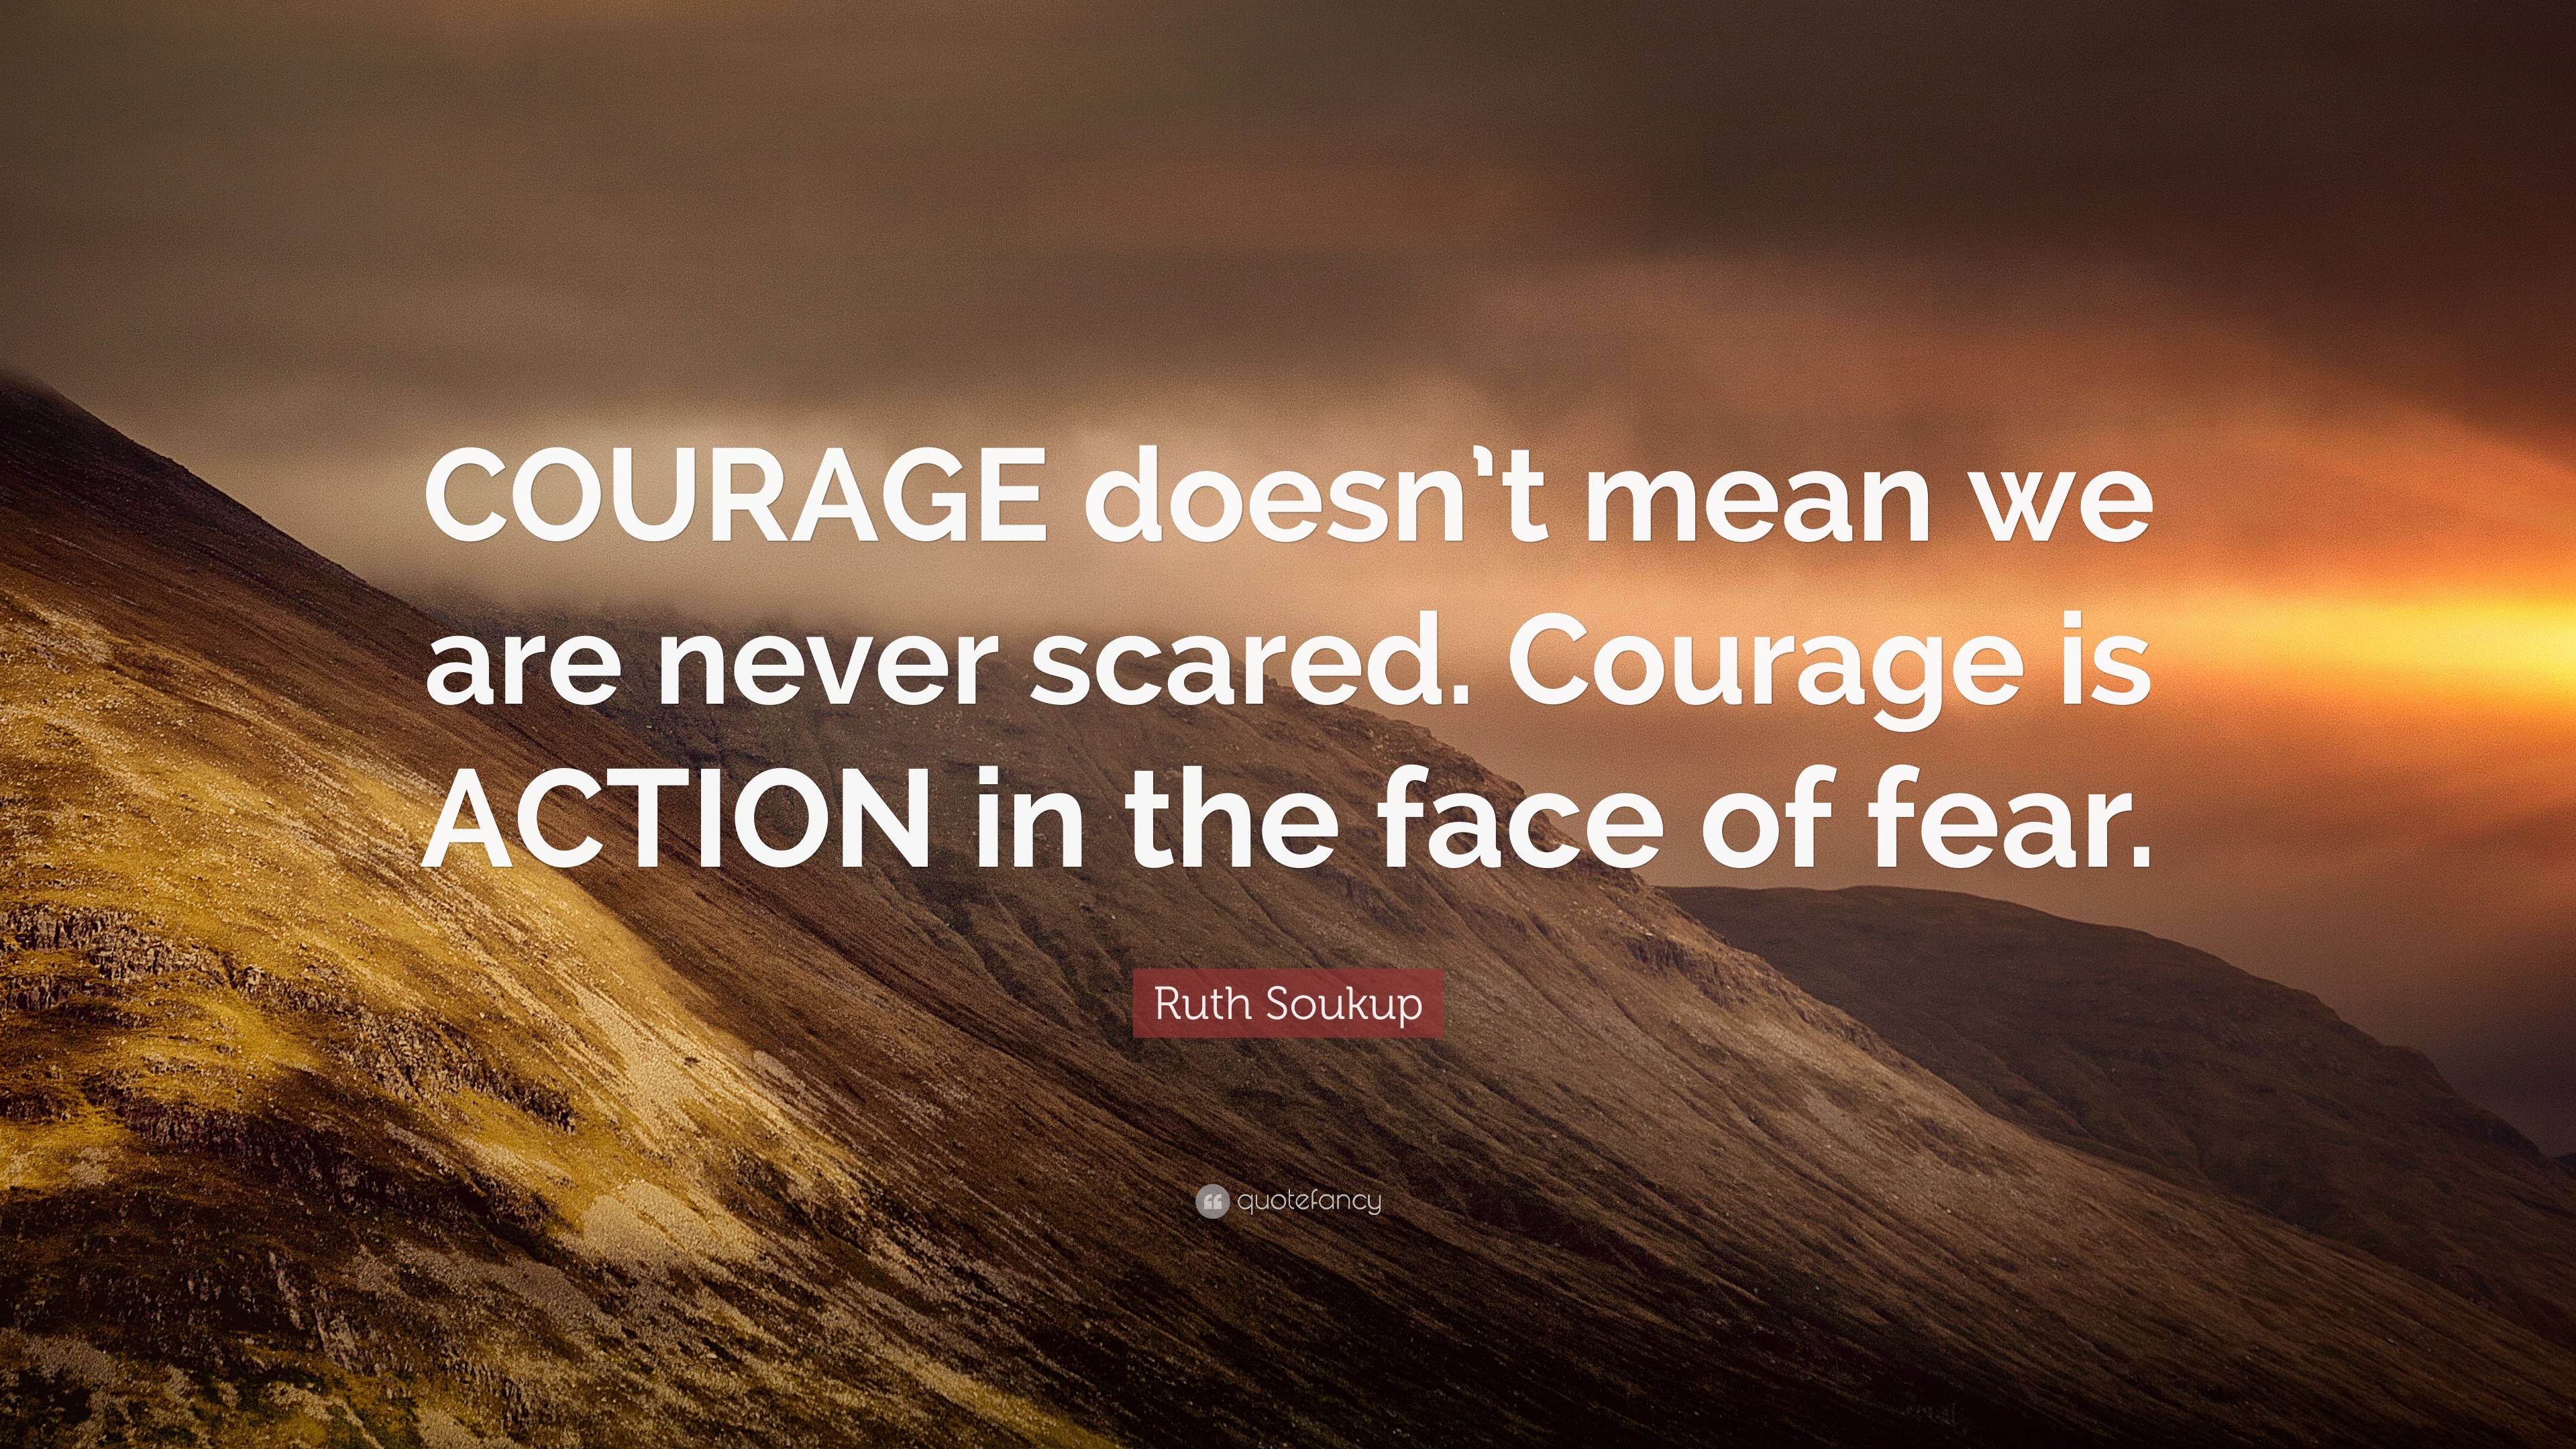 Ruth Soukup Quote: “COURAGE doesn’t mean we are never scared. Courage ...